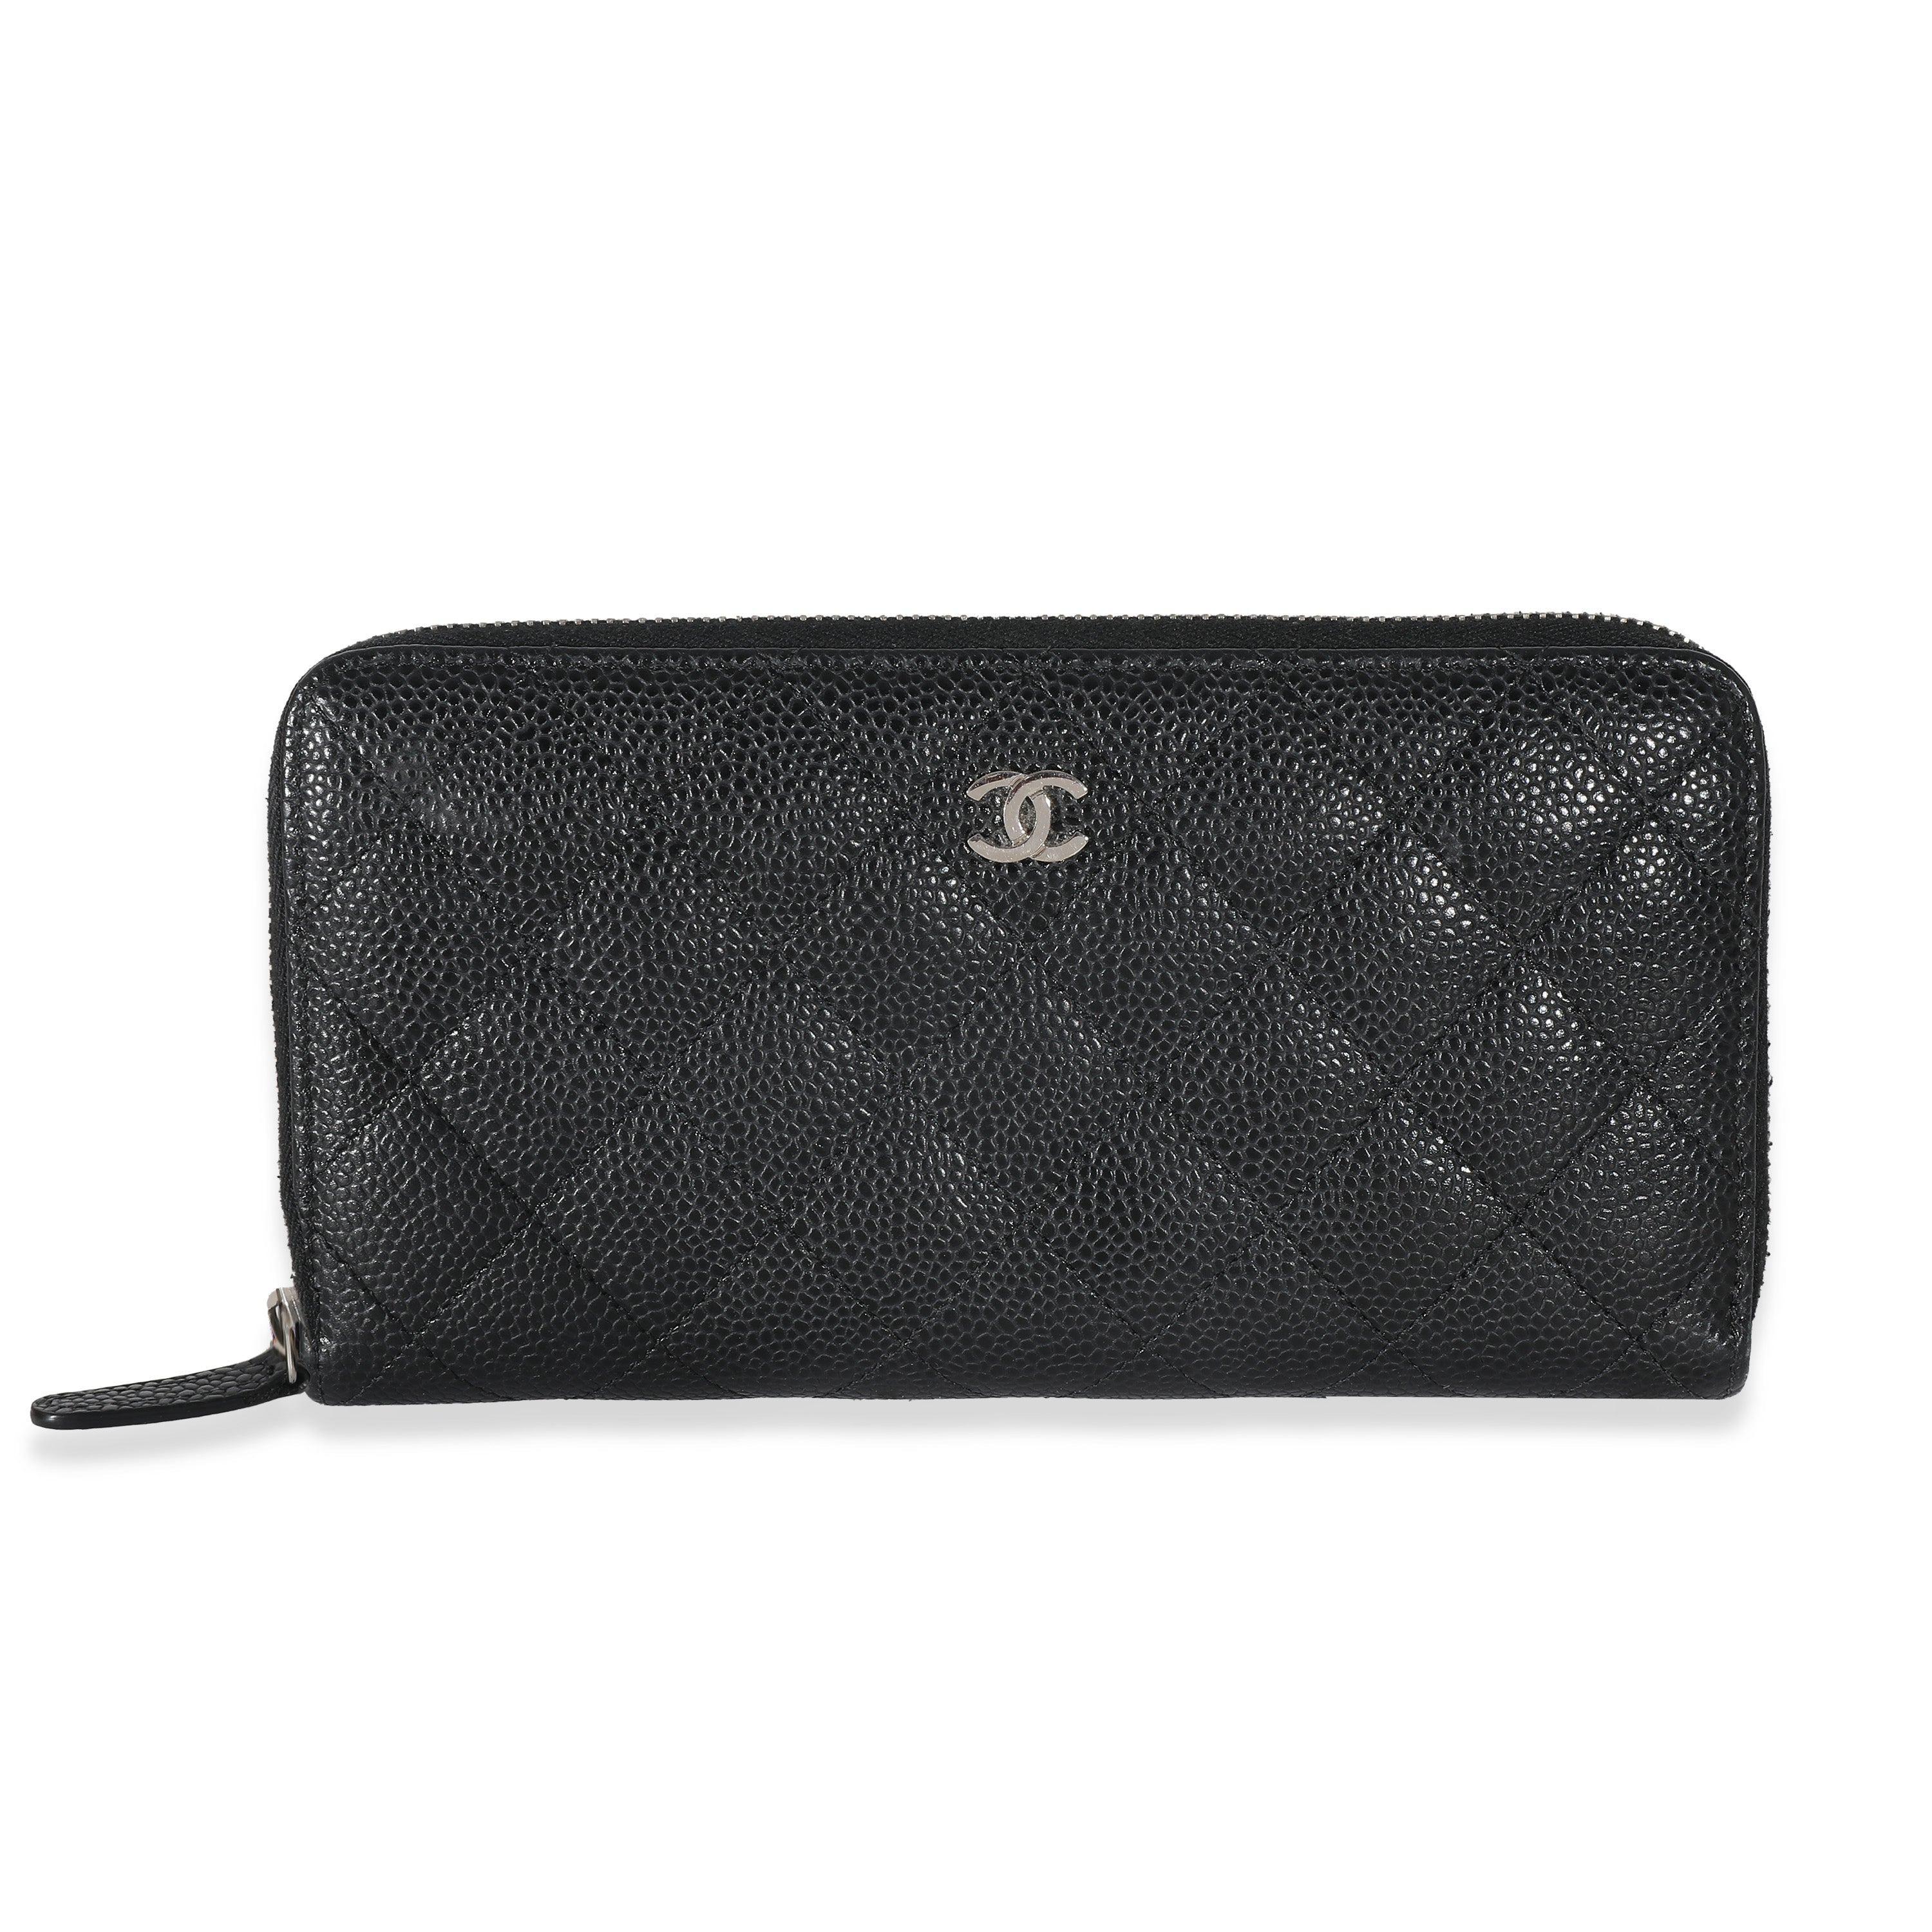 Chanel Black Quilted Caviar Classic Long Zipped Wallet, myGemma, JP